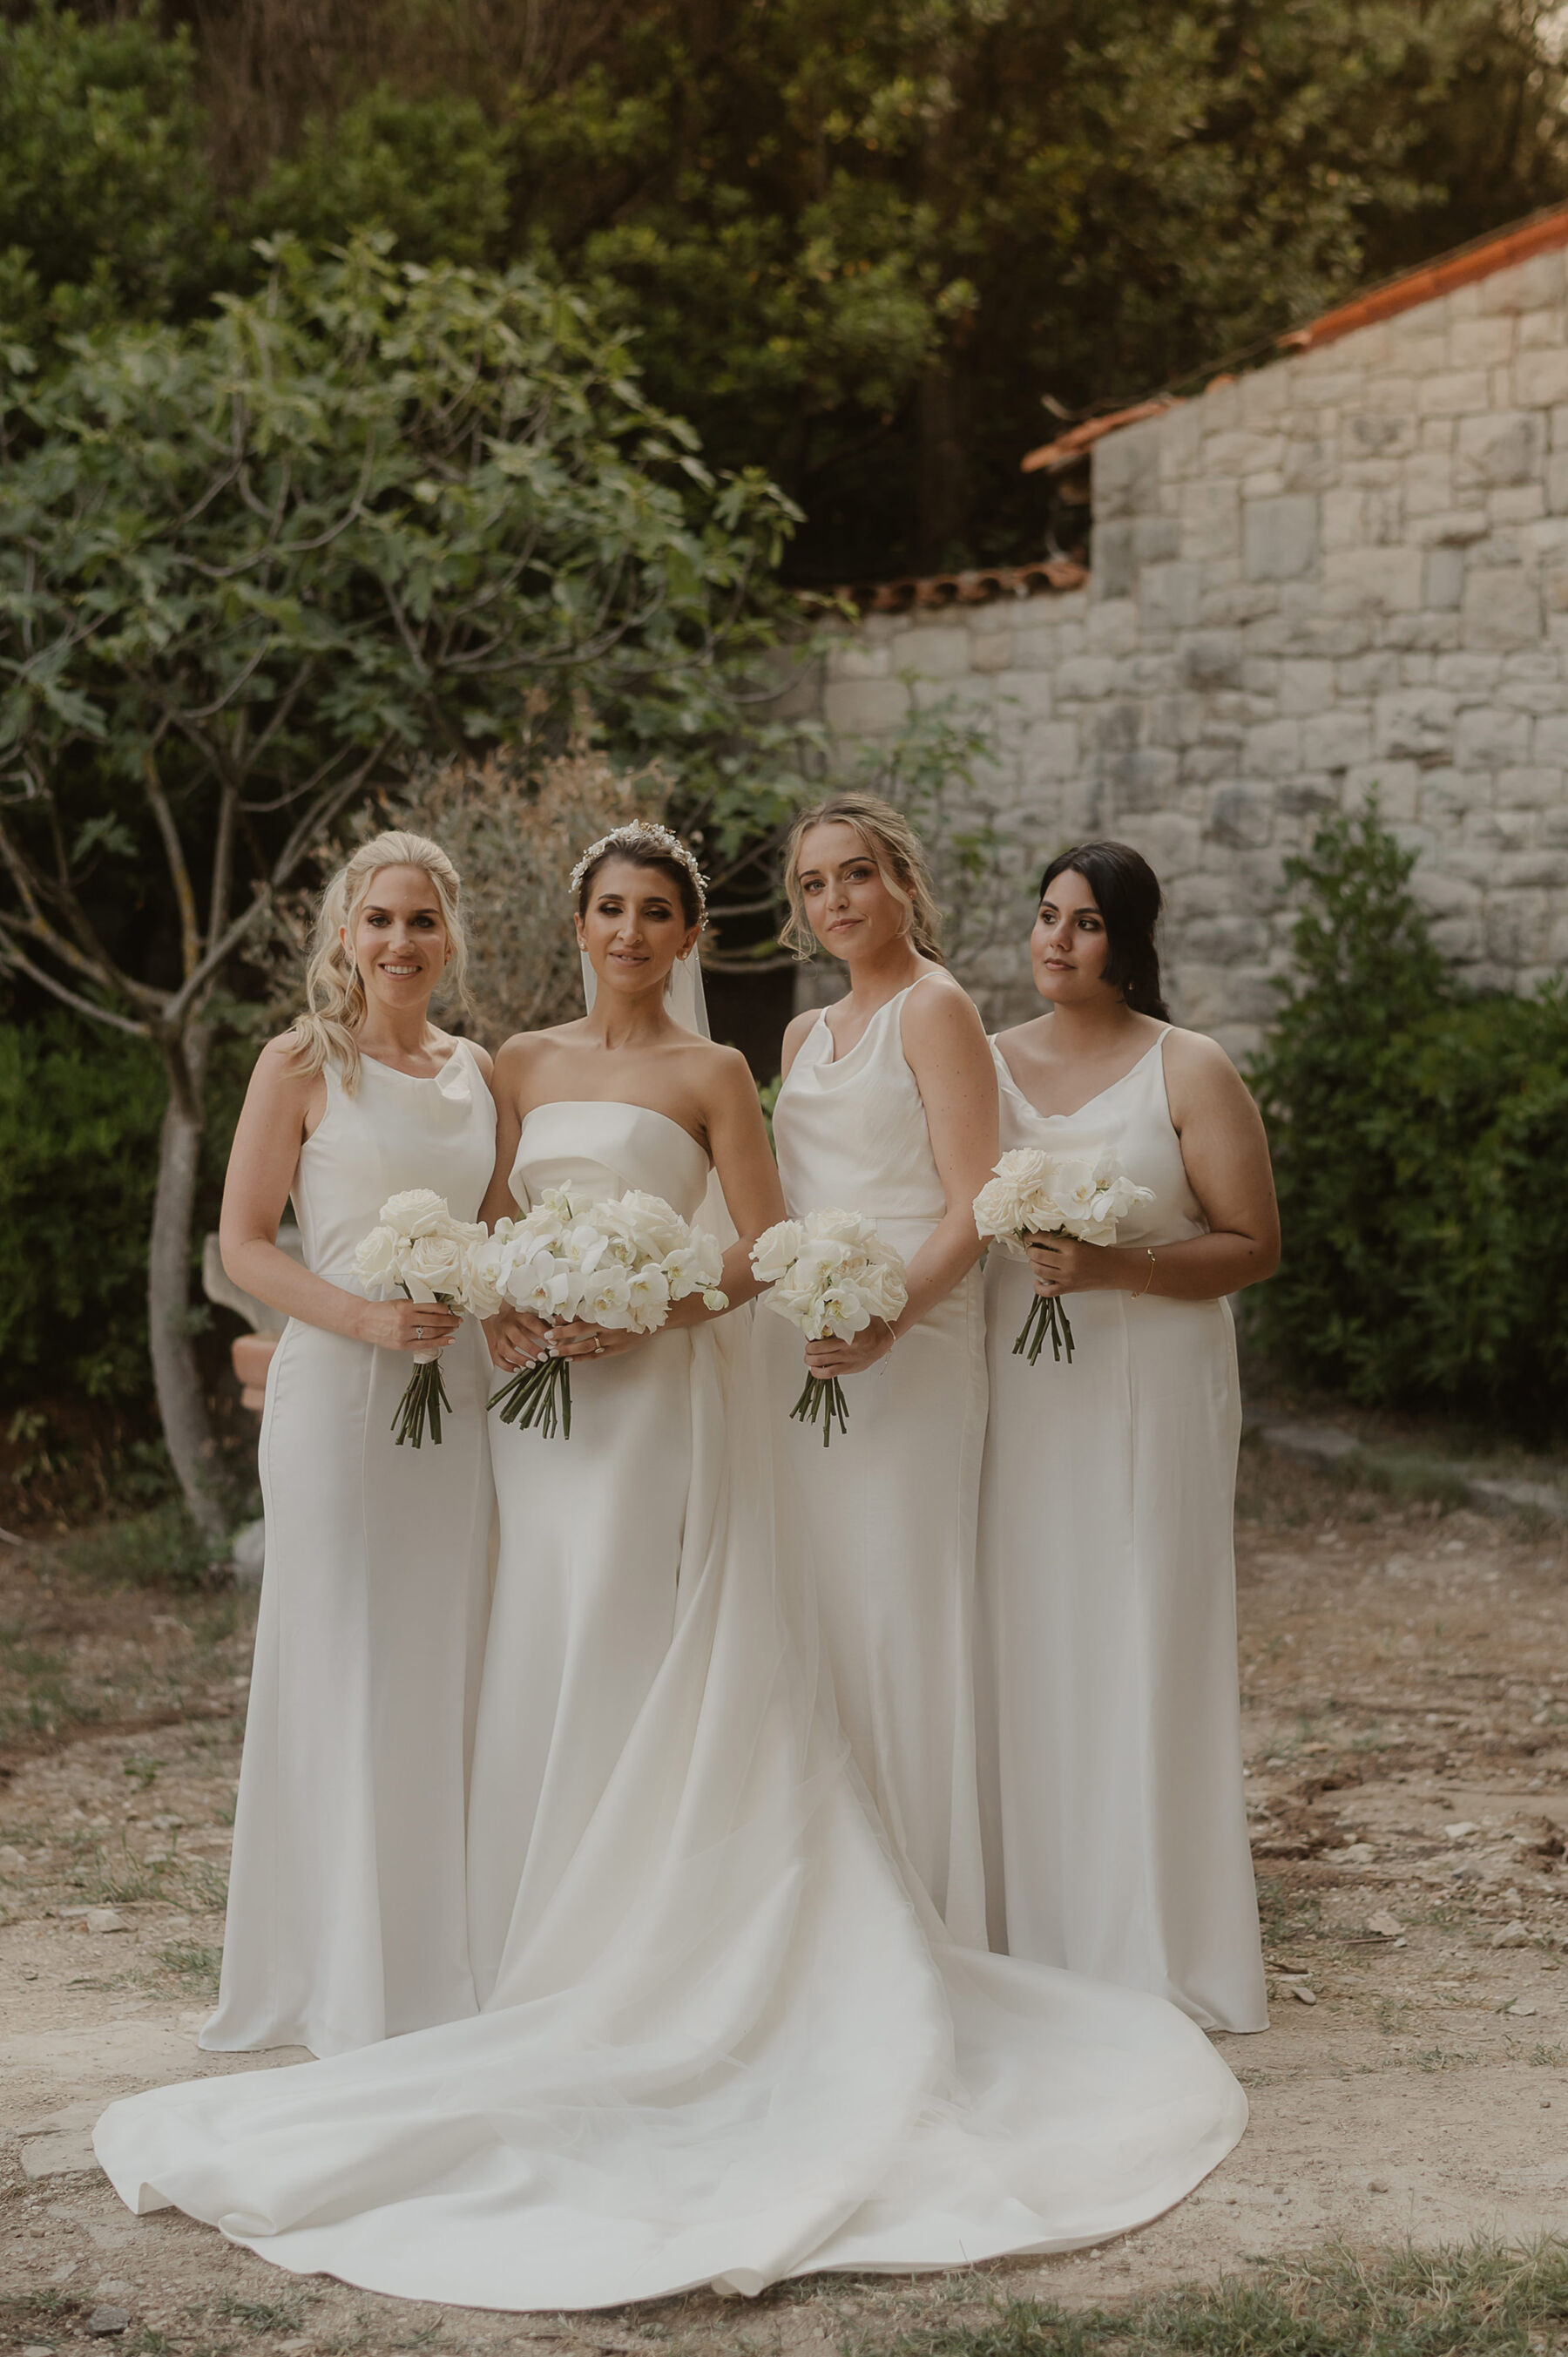 Bridesmaids in white dresses from Chi Chi London. Bride in a modern minimalist wedding dress by Eva Lendel.